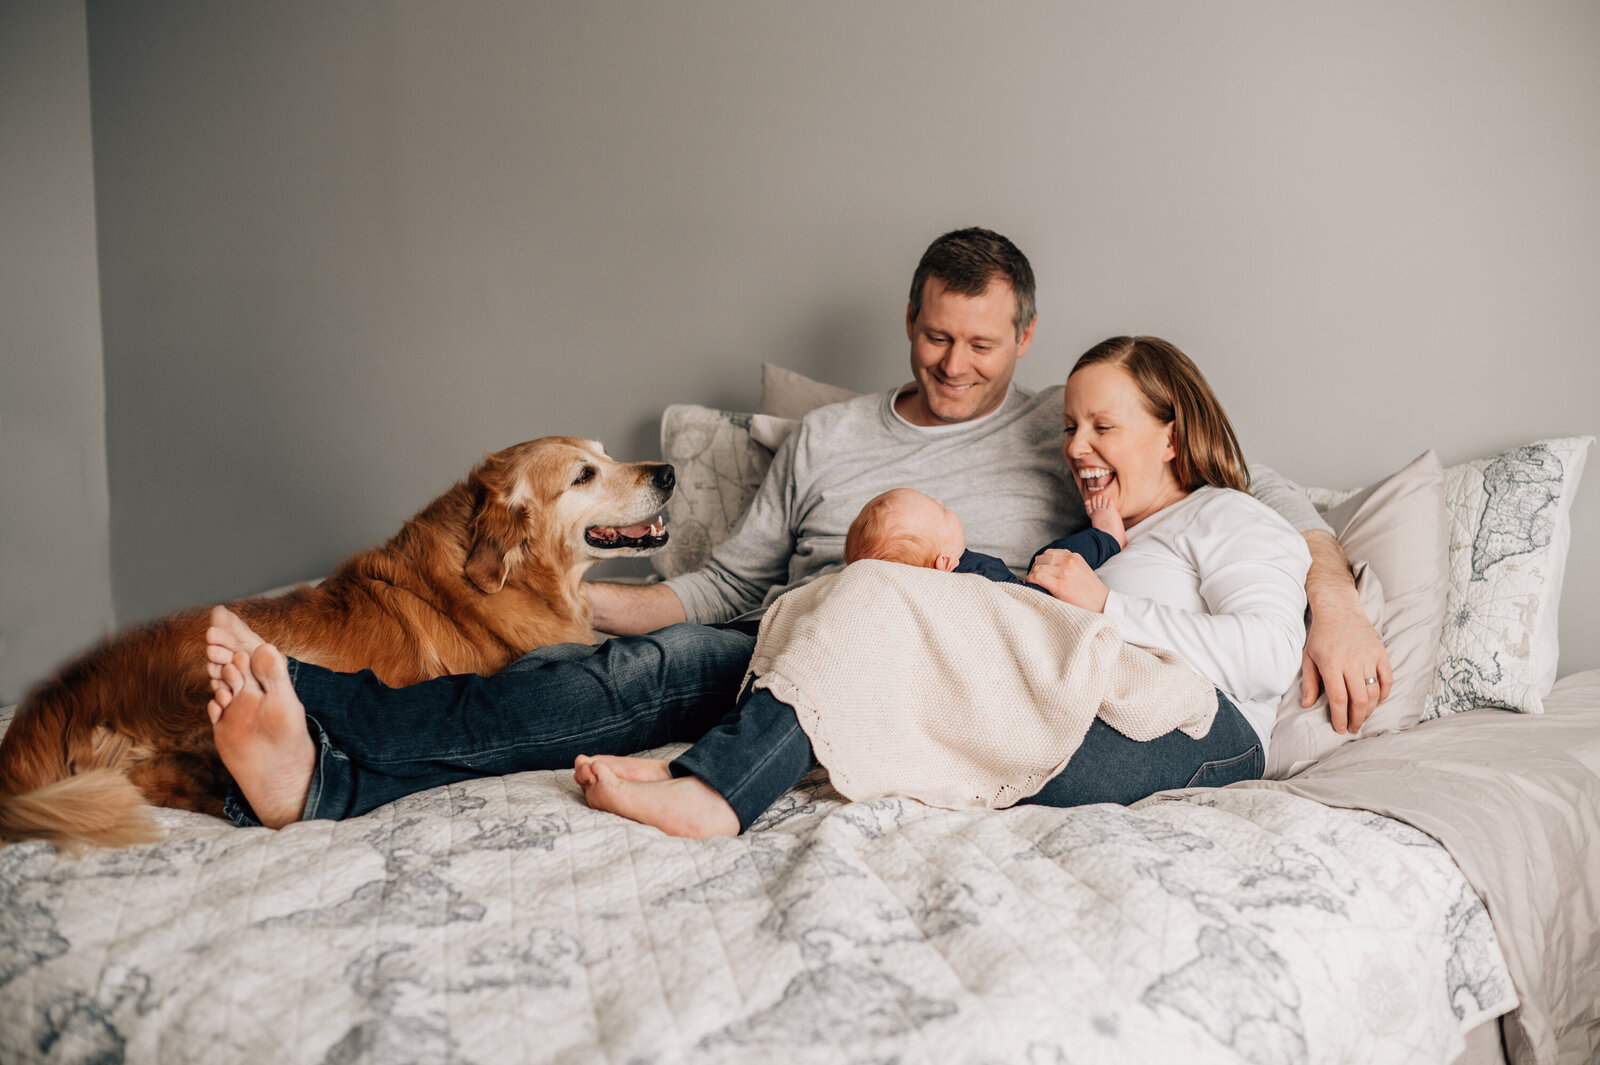 Mom, Dad and dog looking at their newborn baby lying on their bed.